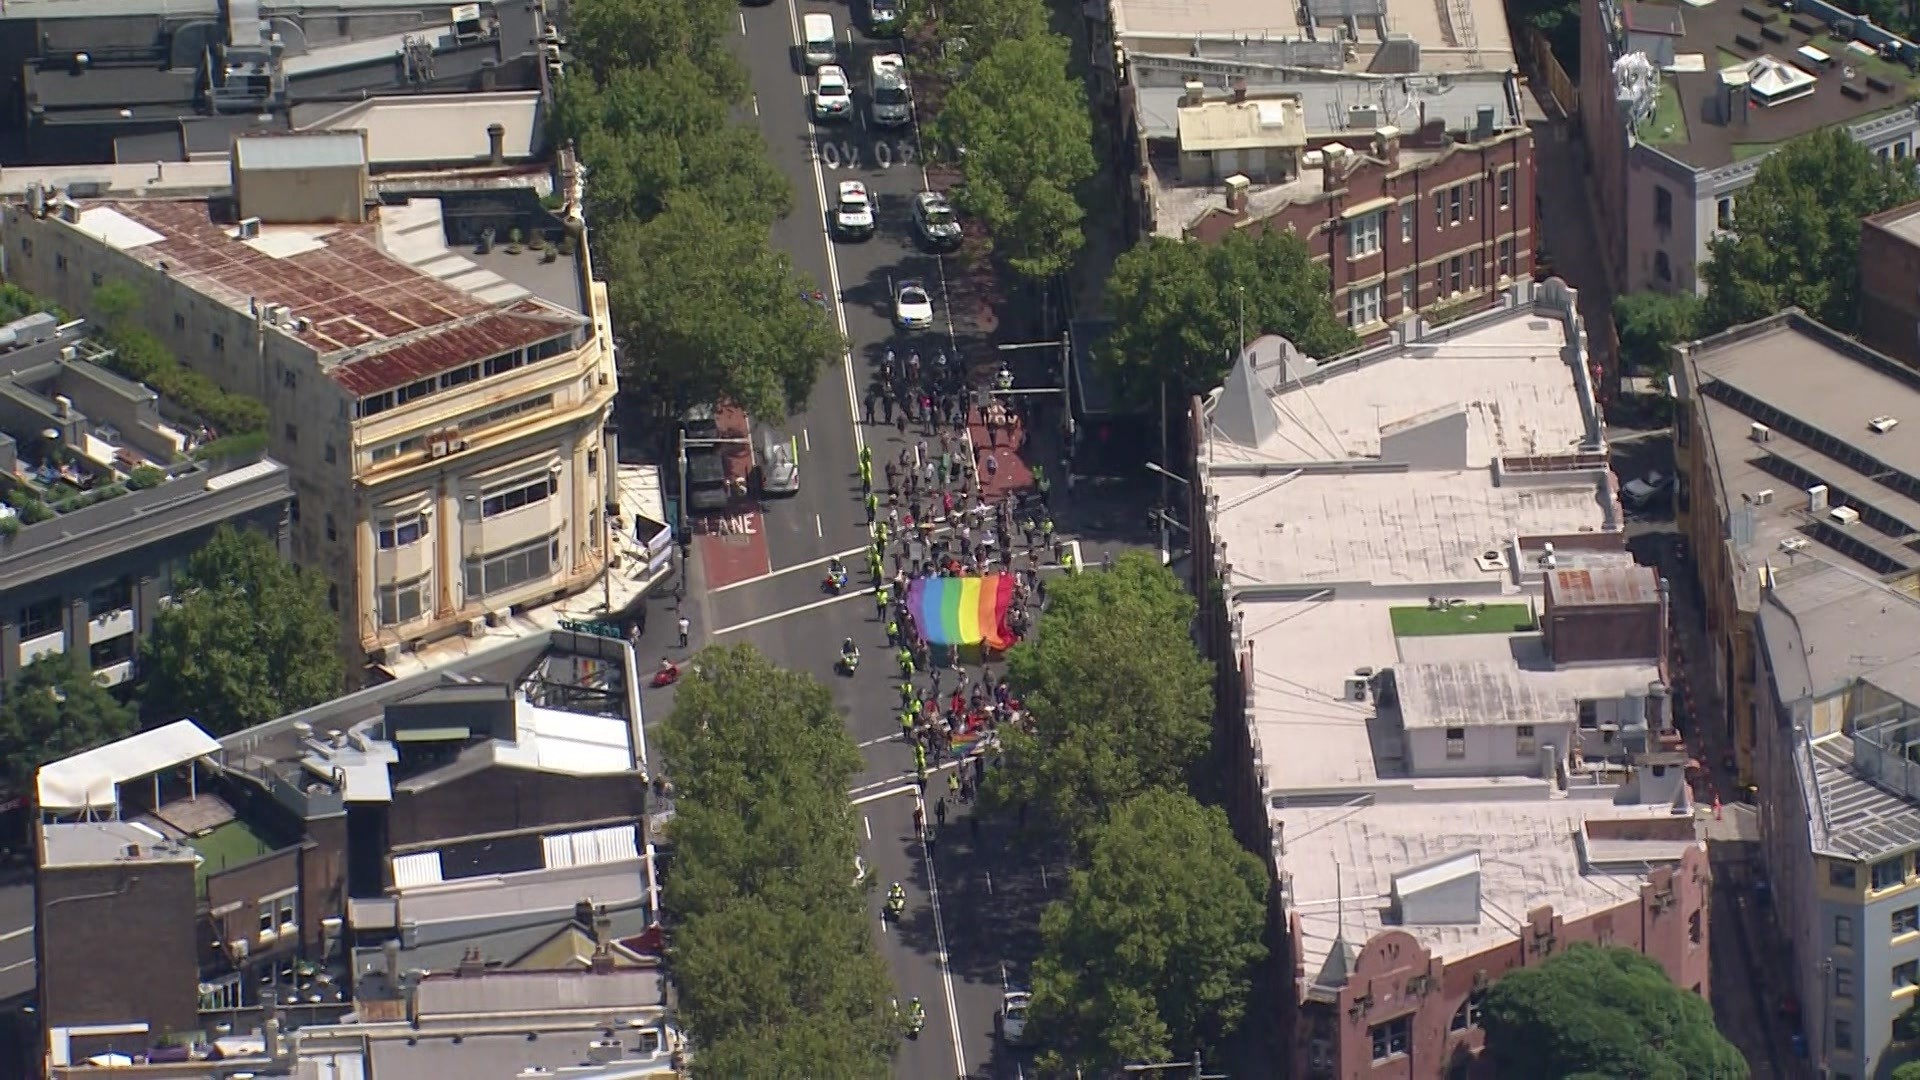 Aerial view of marchers